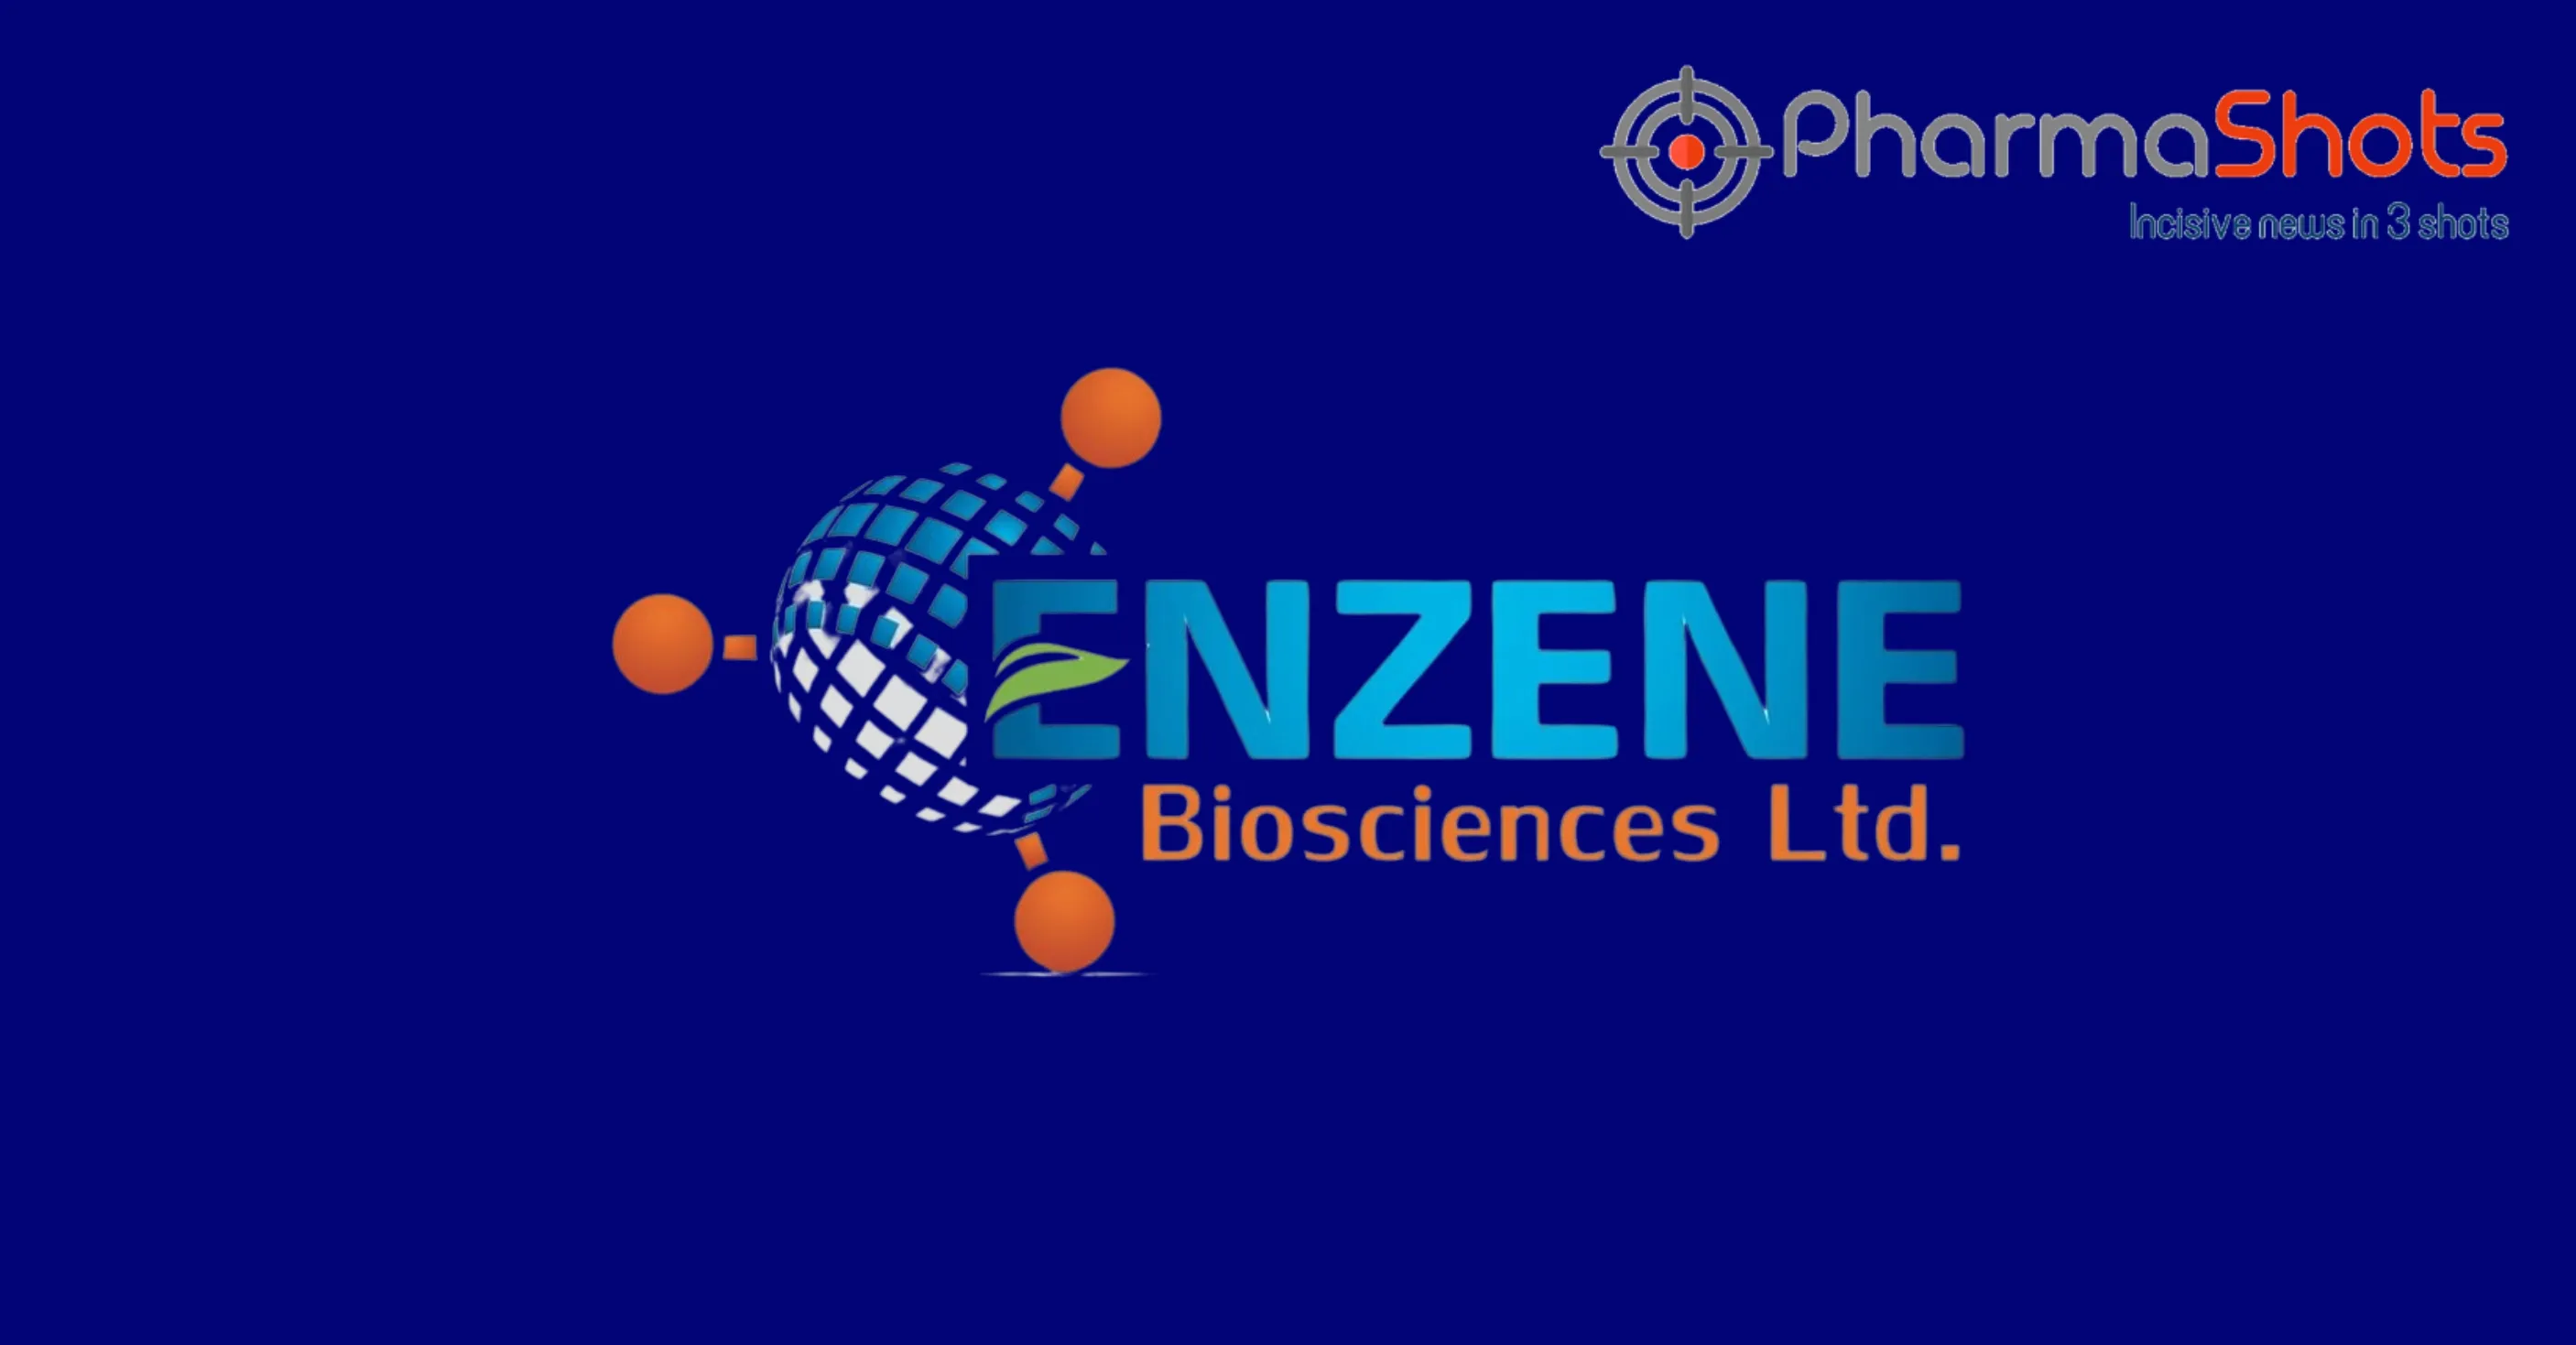 Enzene Biosciences Reports the Launch of Ranibizumab Biosimilar for the Treatment of Neovascular Age-Related Macular Degeneration (AMD)